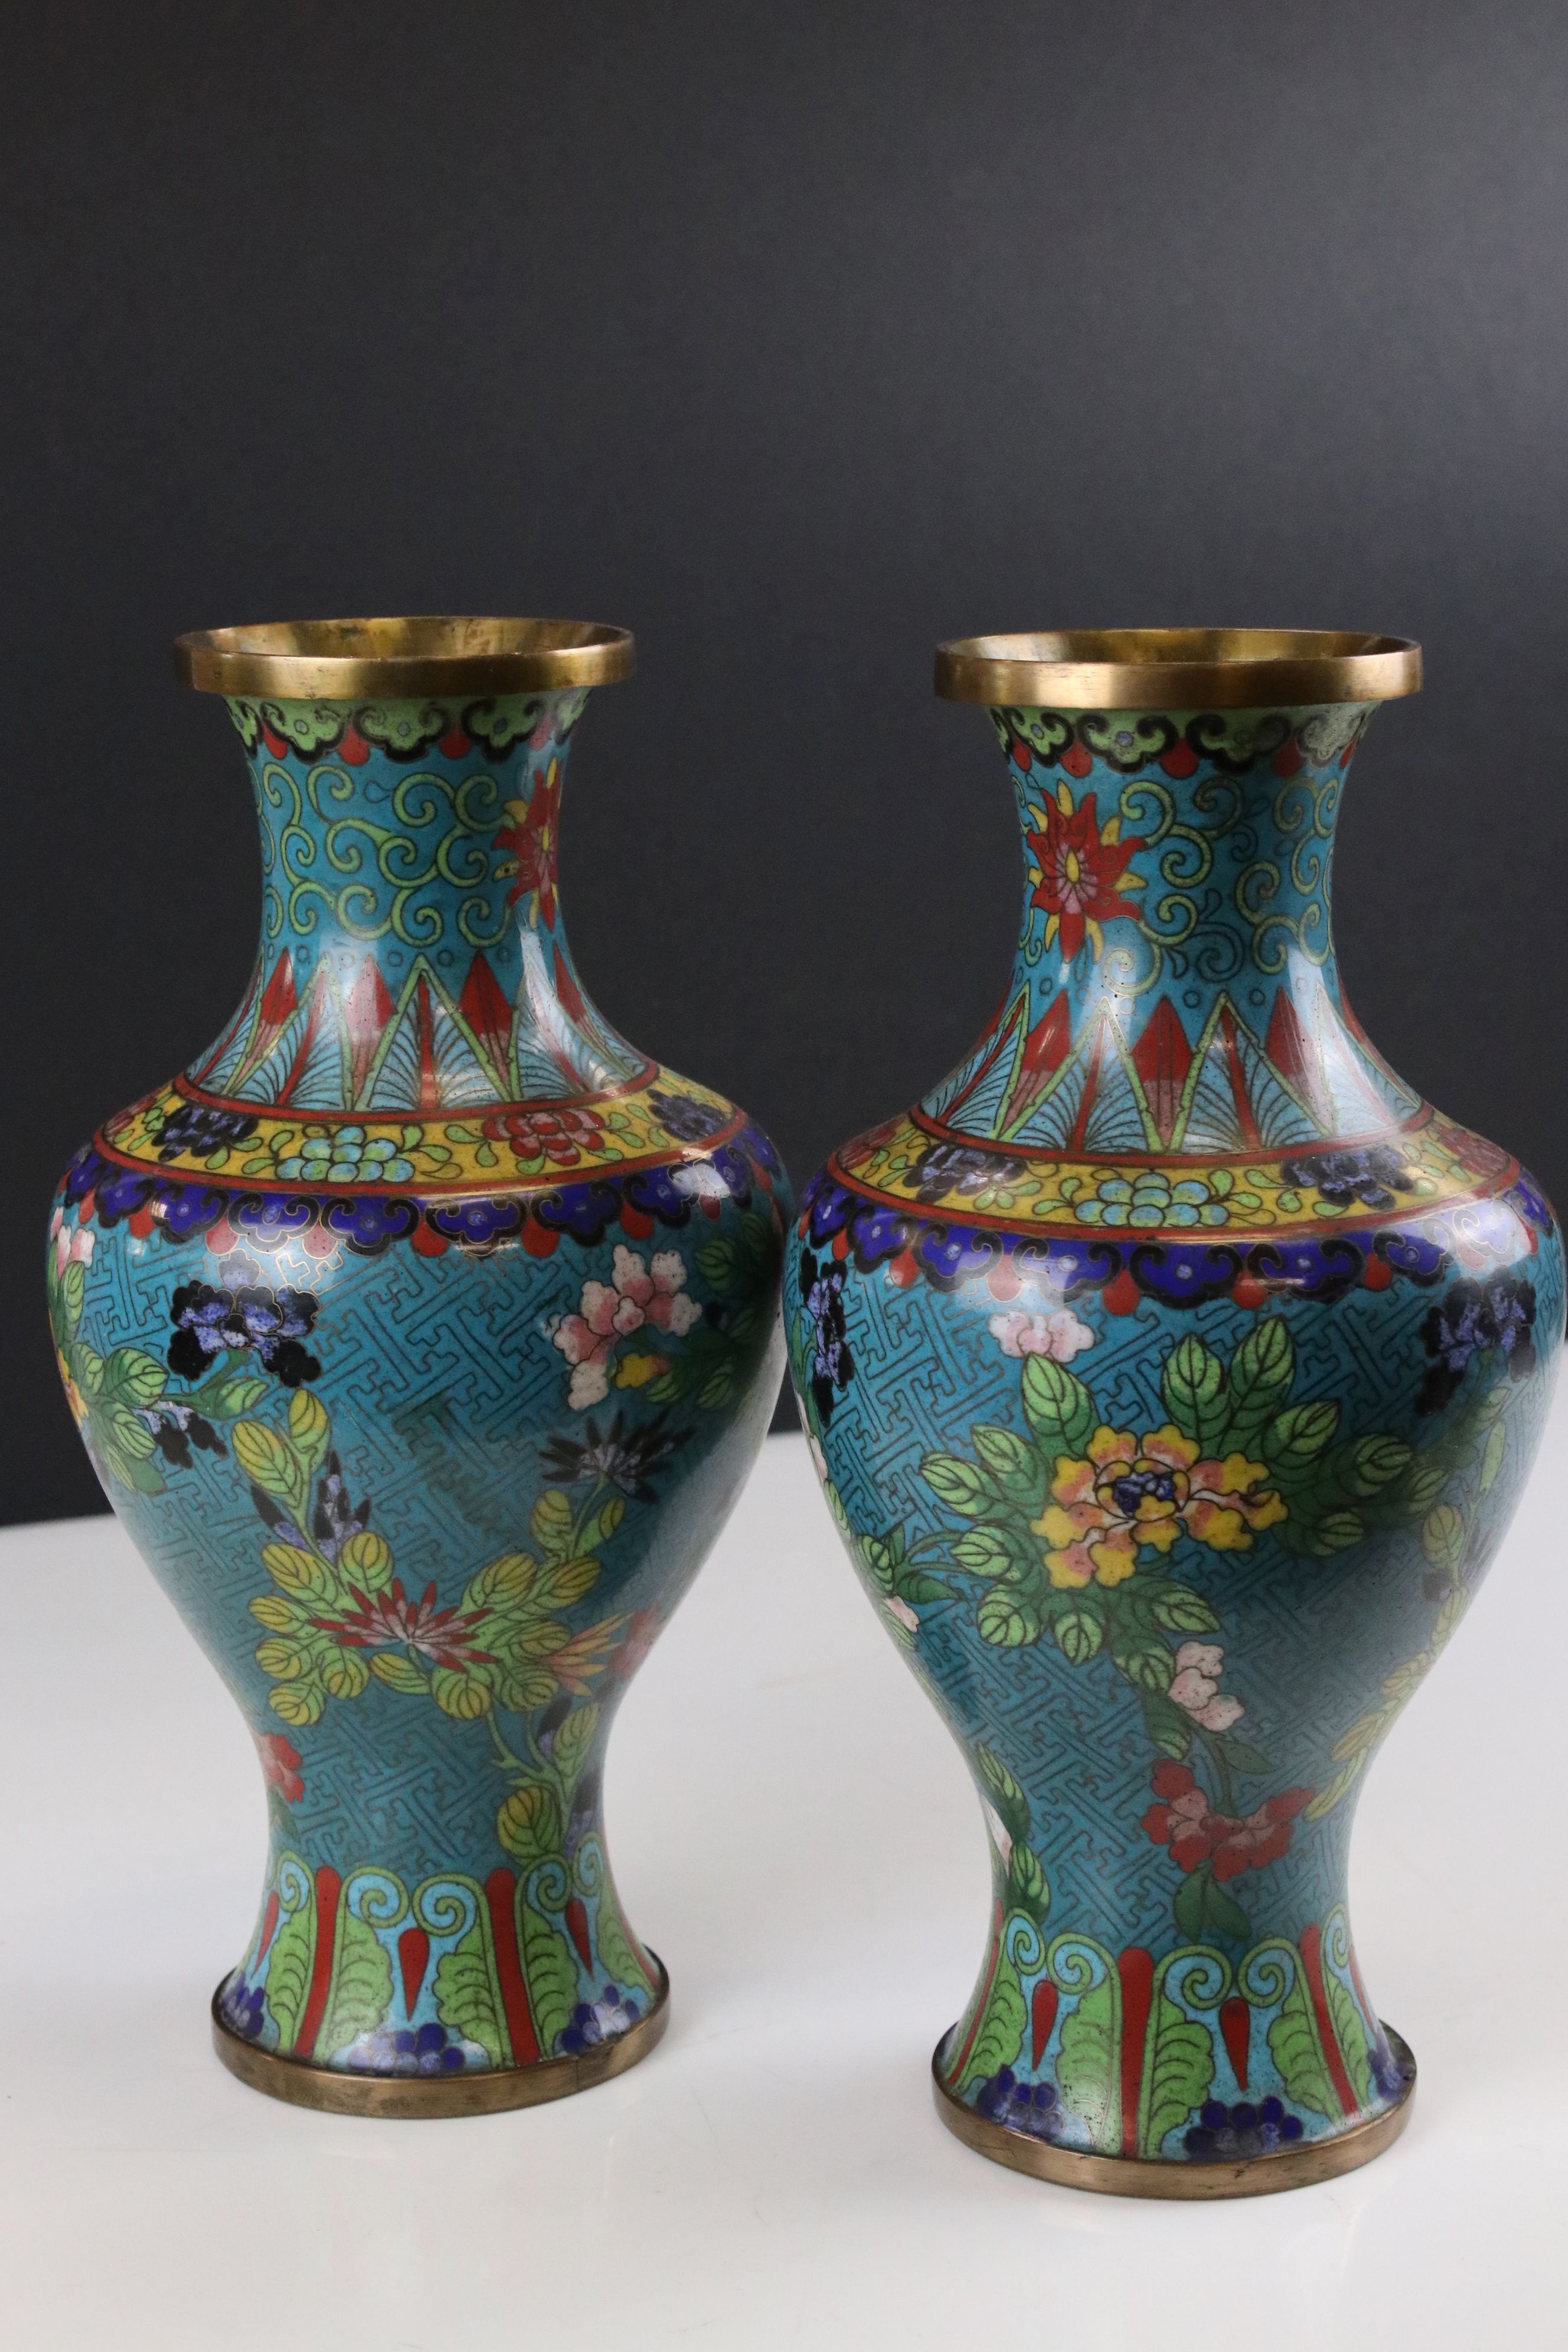 Pair of Chinese Cloisonne Vases decorated with flowers on a turquoise ground, 27cms high